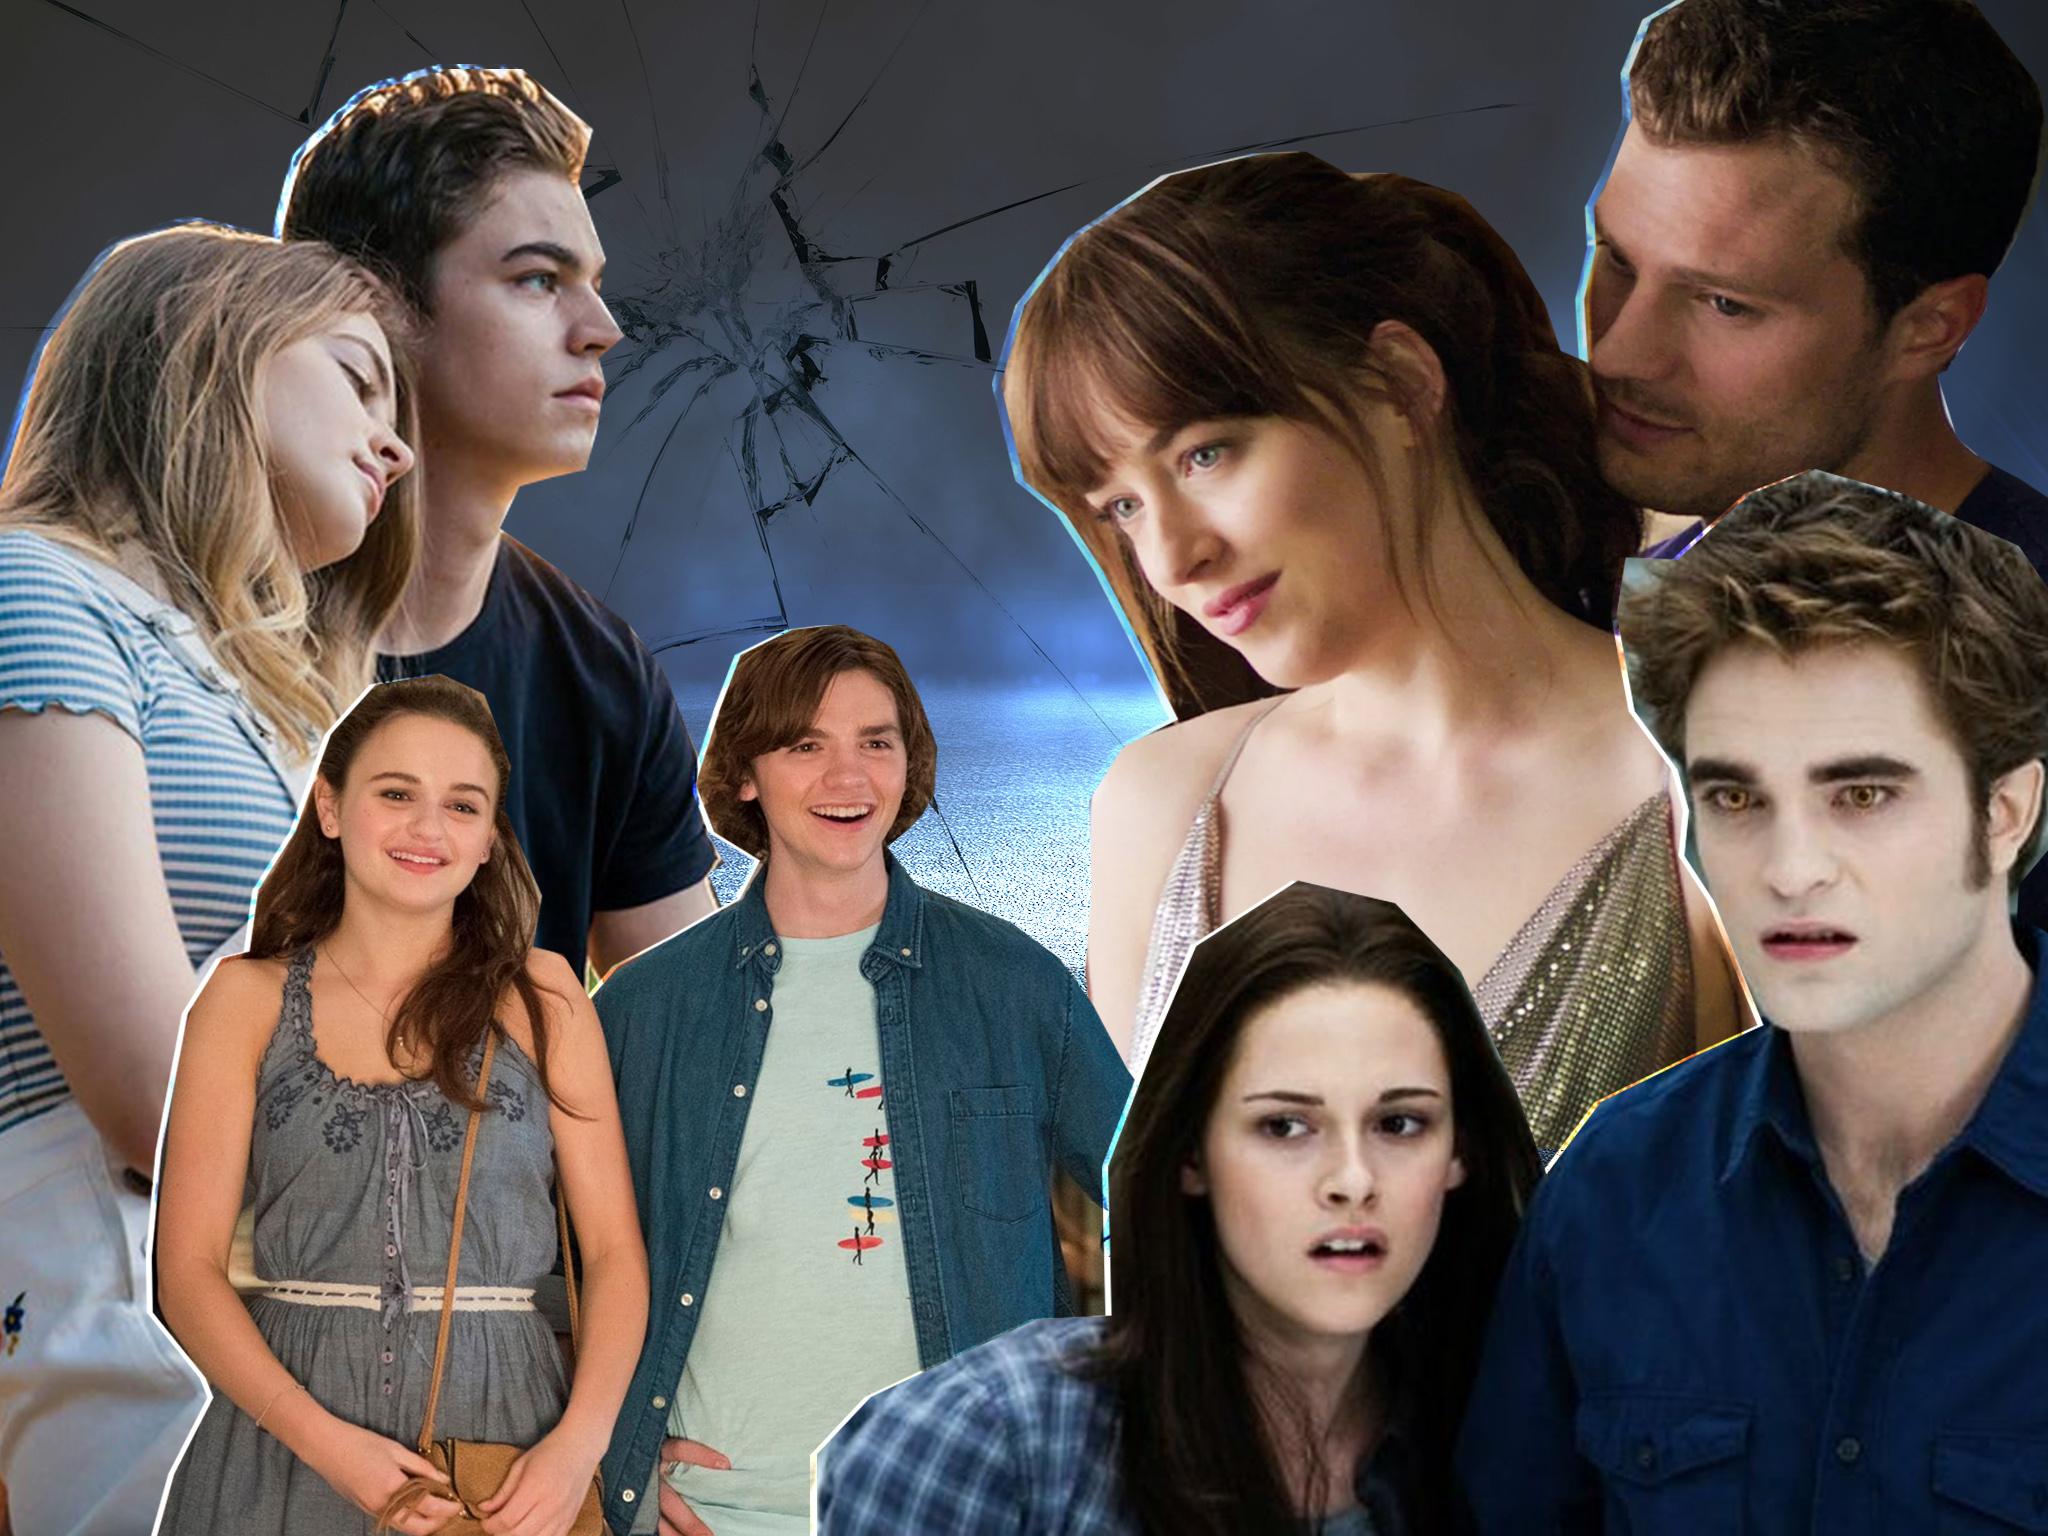 (Top row) ‘After’ and ‘Fifty Shades of Grey’ (Bottom) ‘The Kissing Booth’ and ‘Twilight’